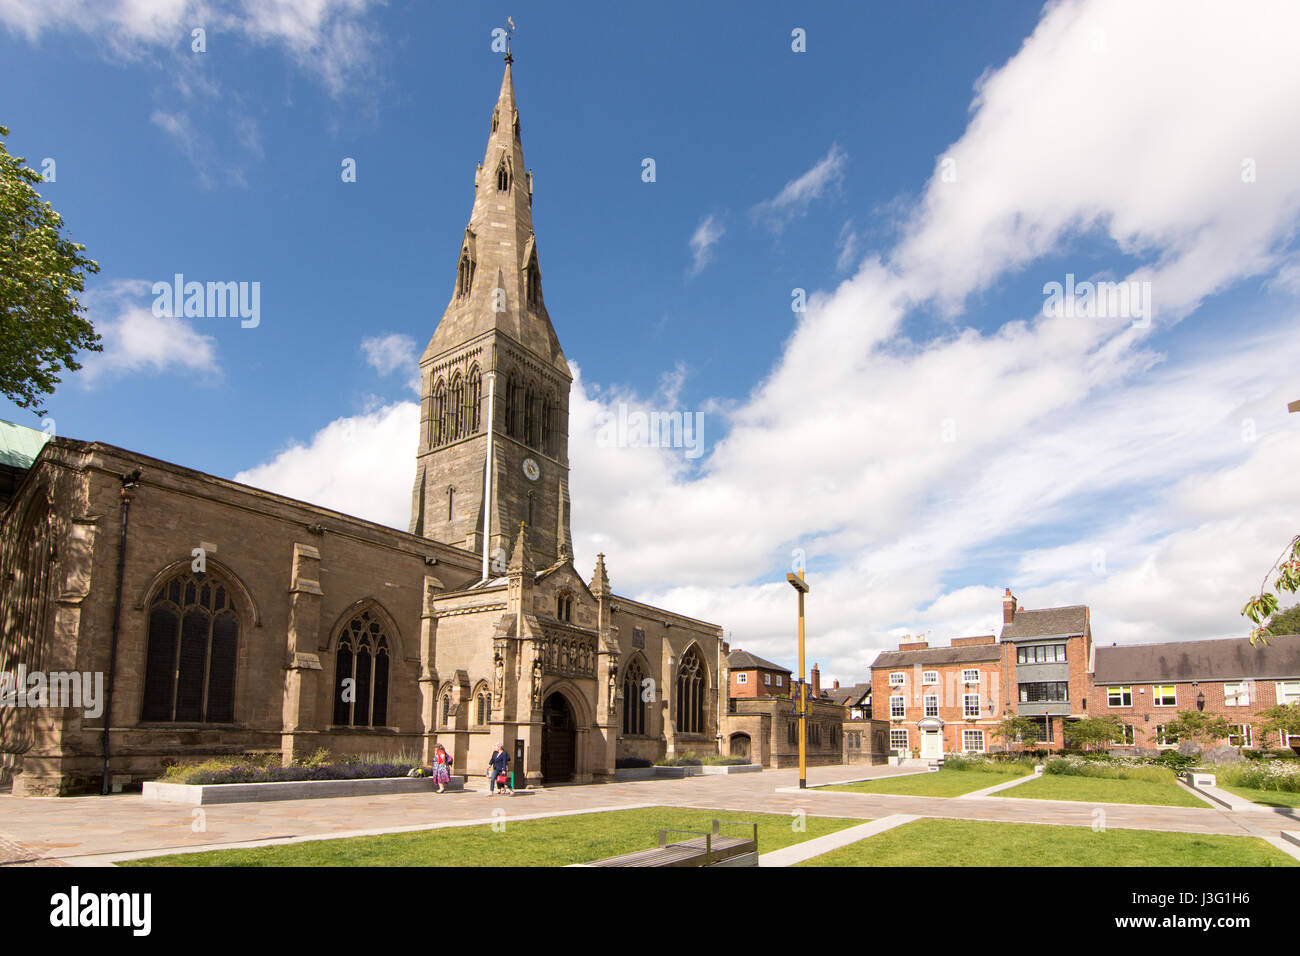 Leicester, England, UK - June 28, 2015: Pedestrians walk past Leicester Cathedral on a sunny day in summer. Stock Photo